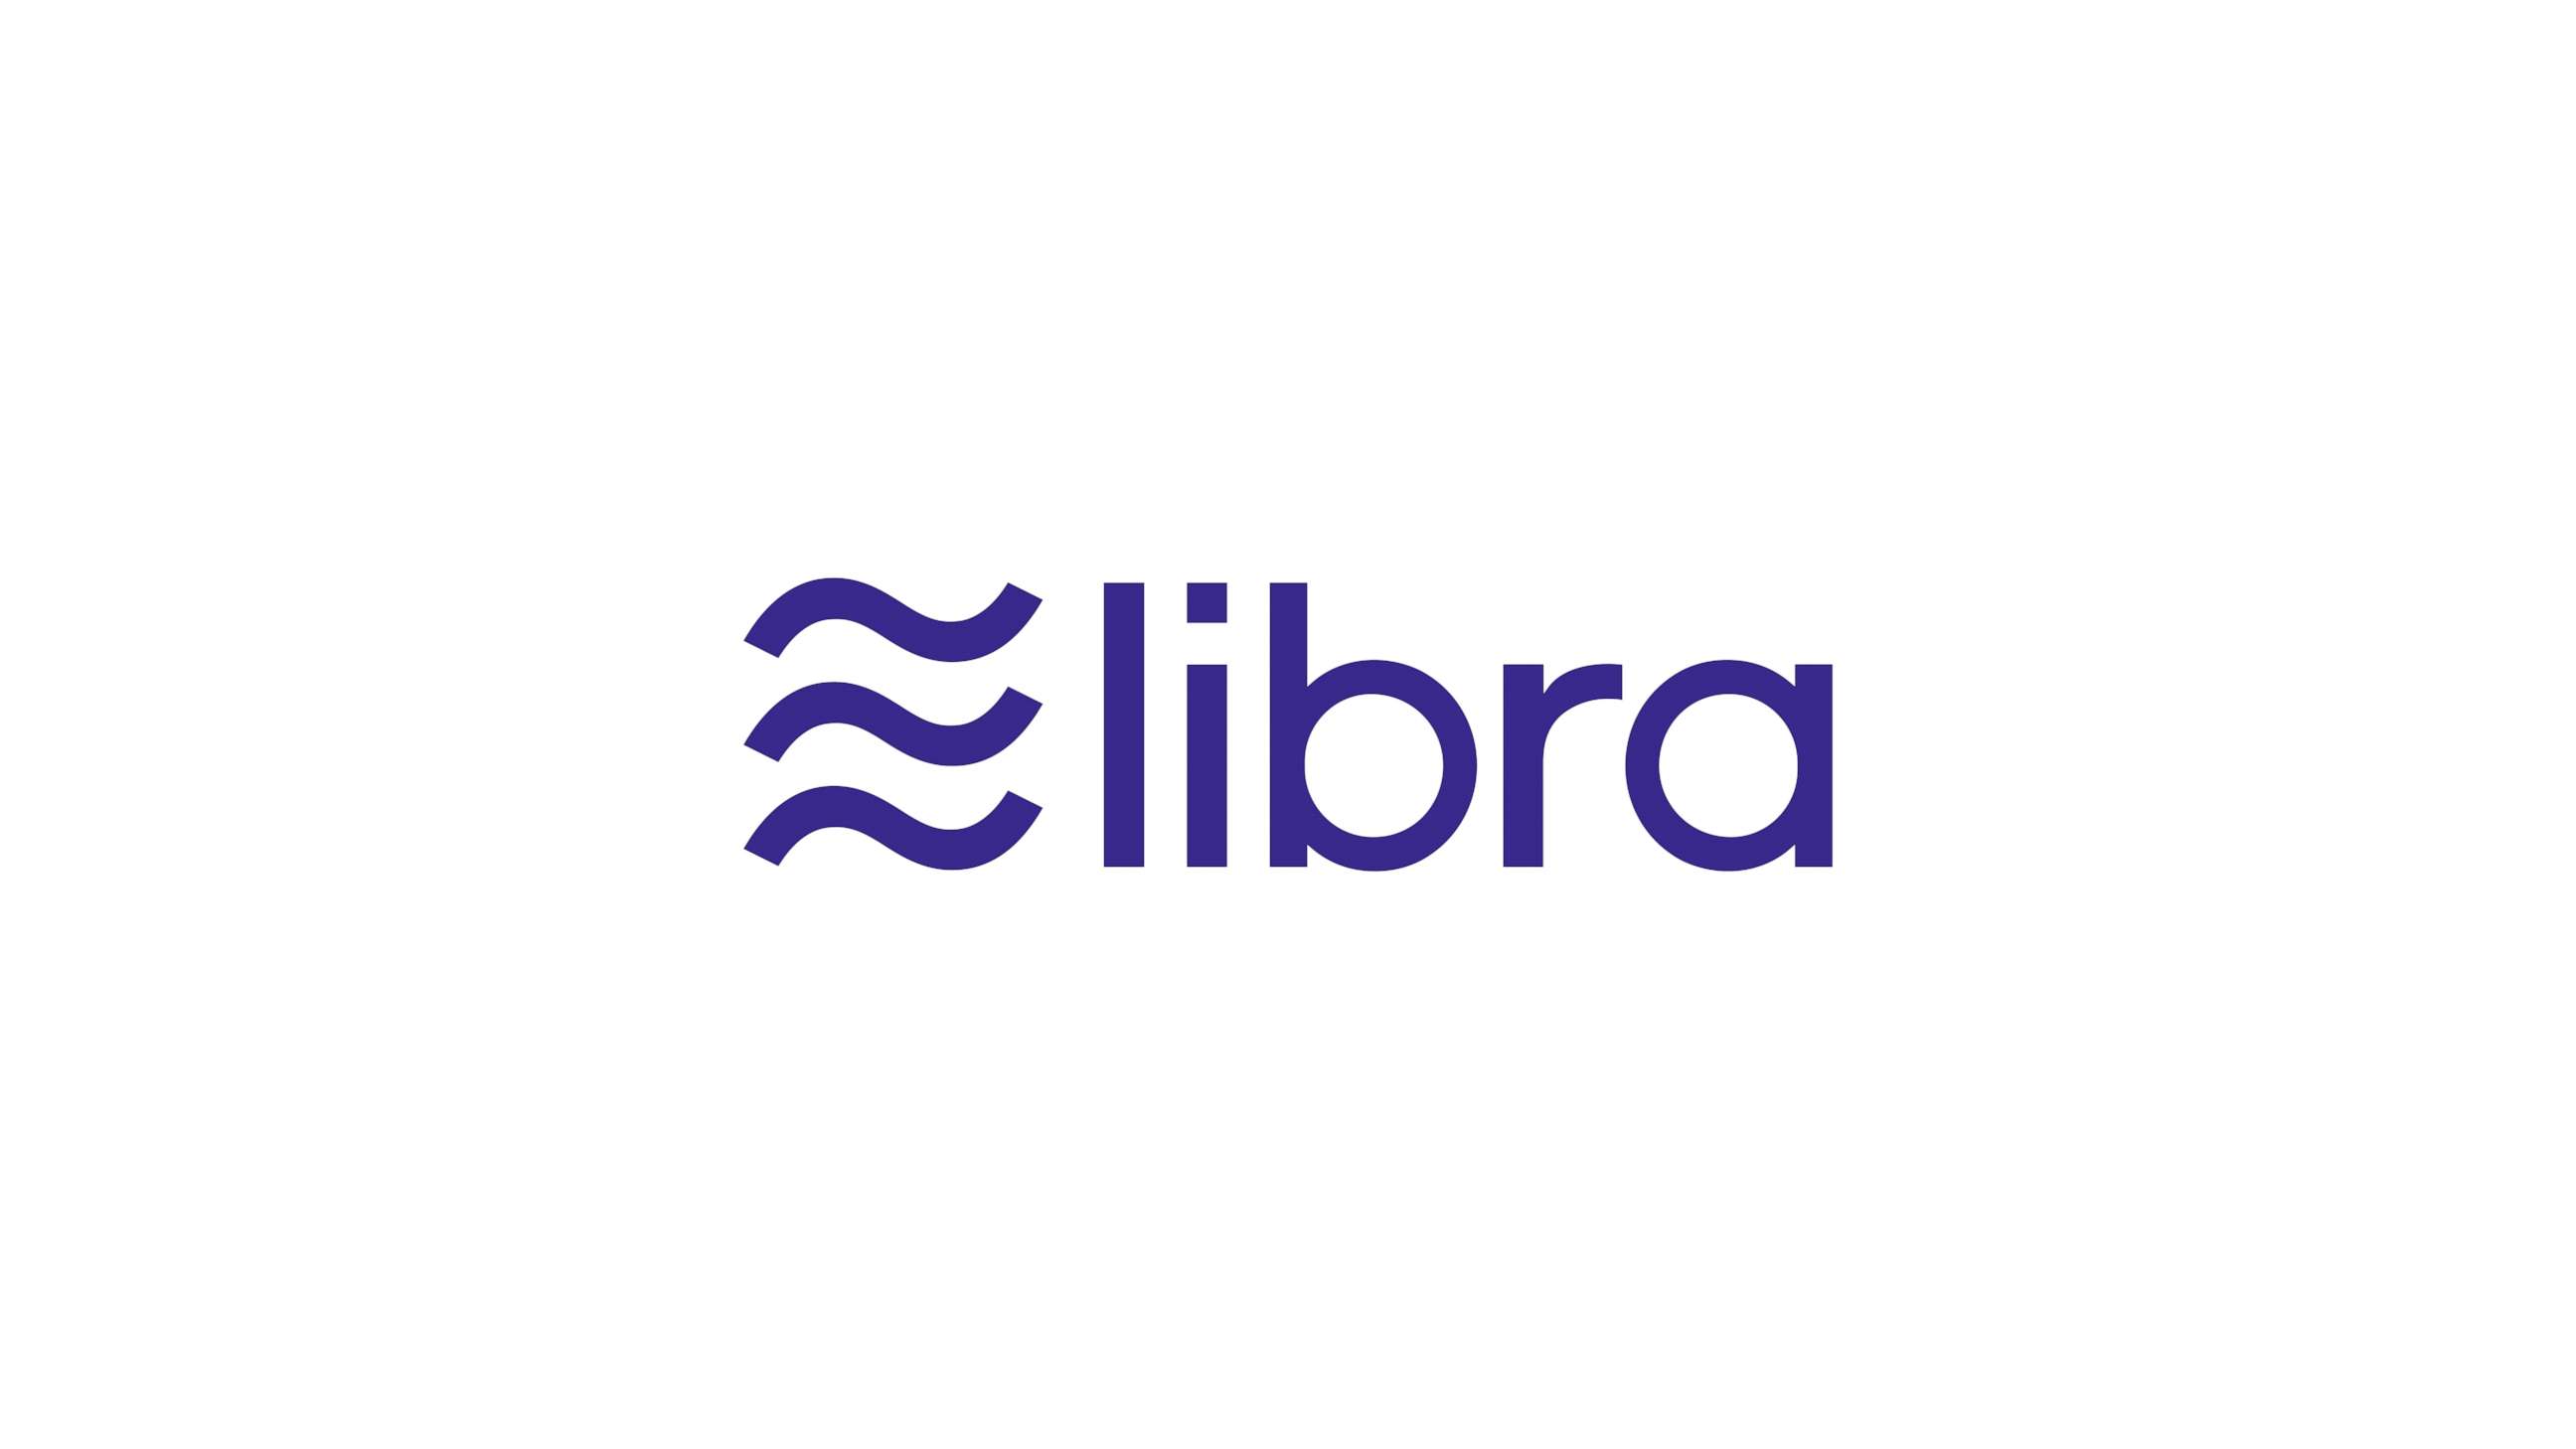 PHOTO: Calibra, which will provide financial services for the Libra network, is expected in 2020.